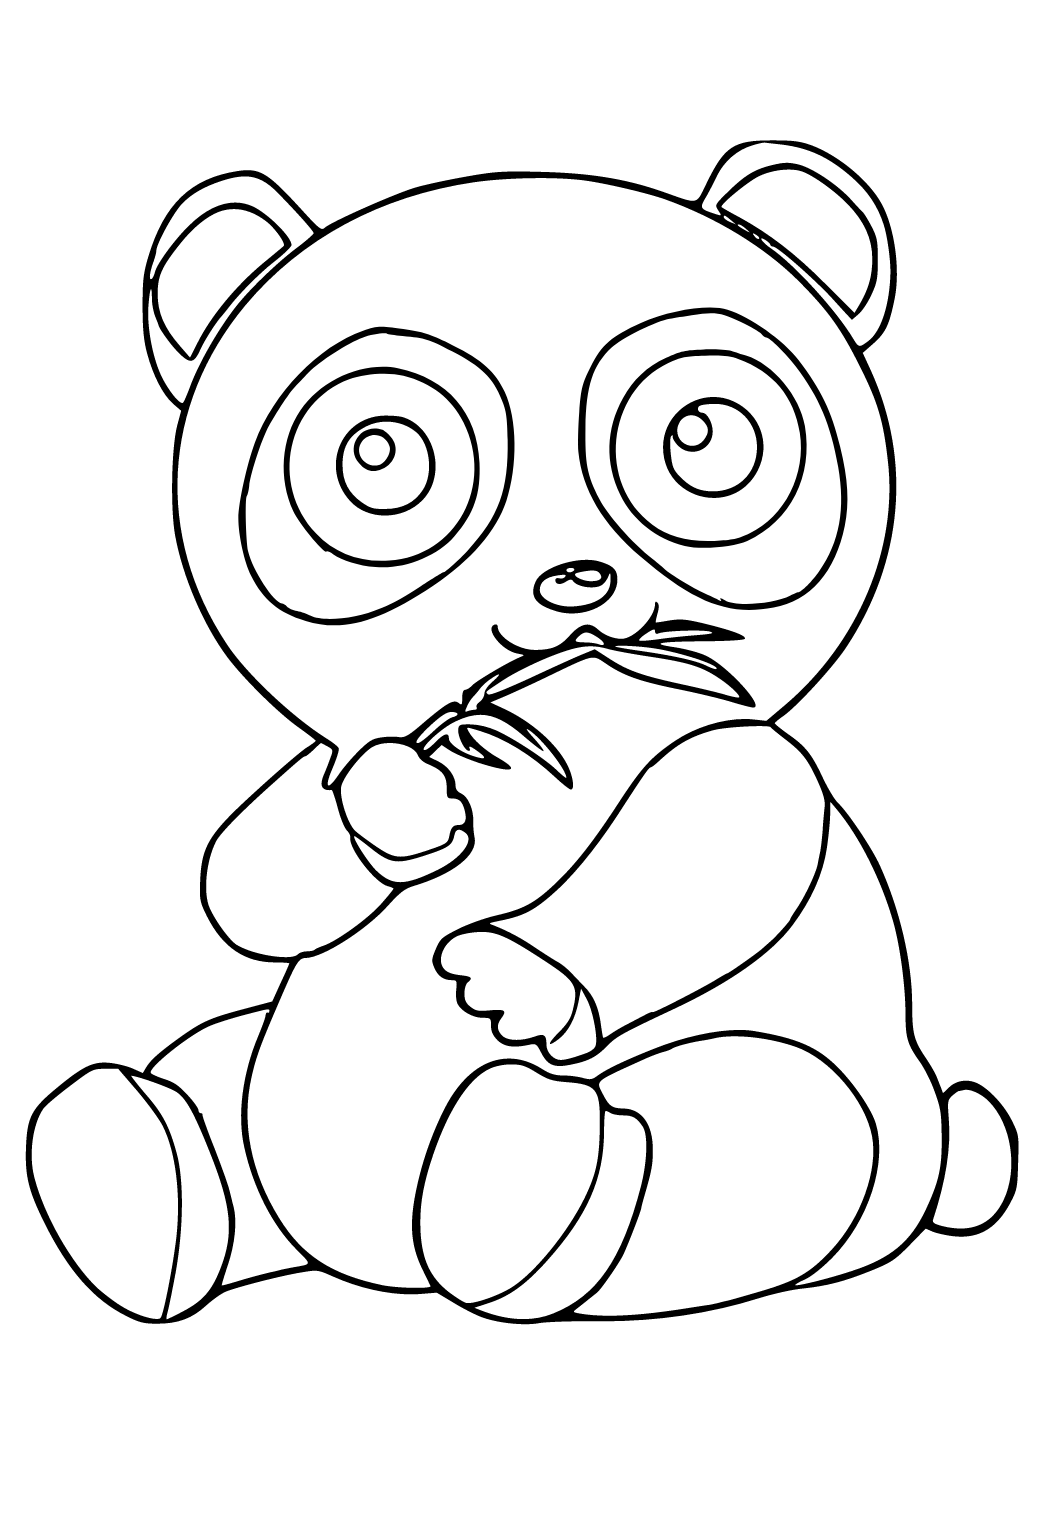 Pocoyo and Toy Panda Coloring Pages - Free Printable Coloring Pages